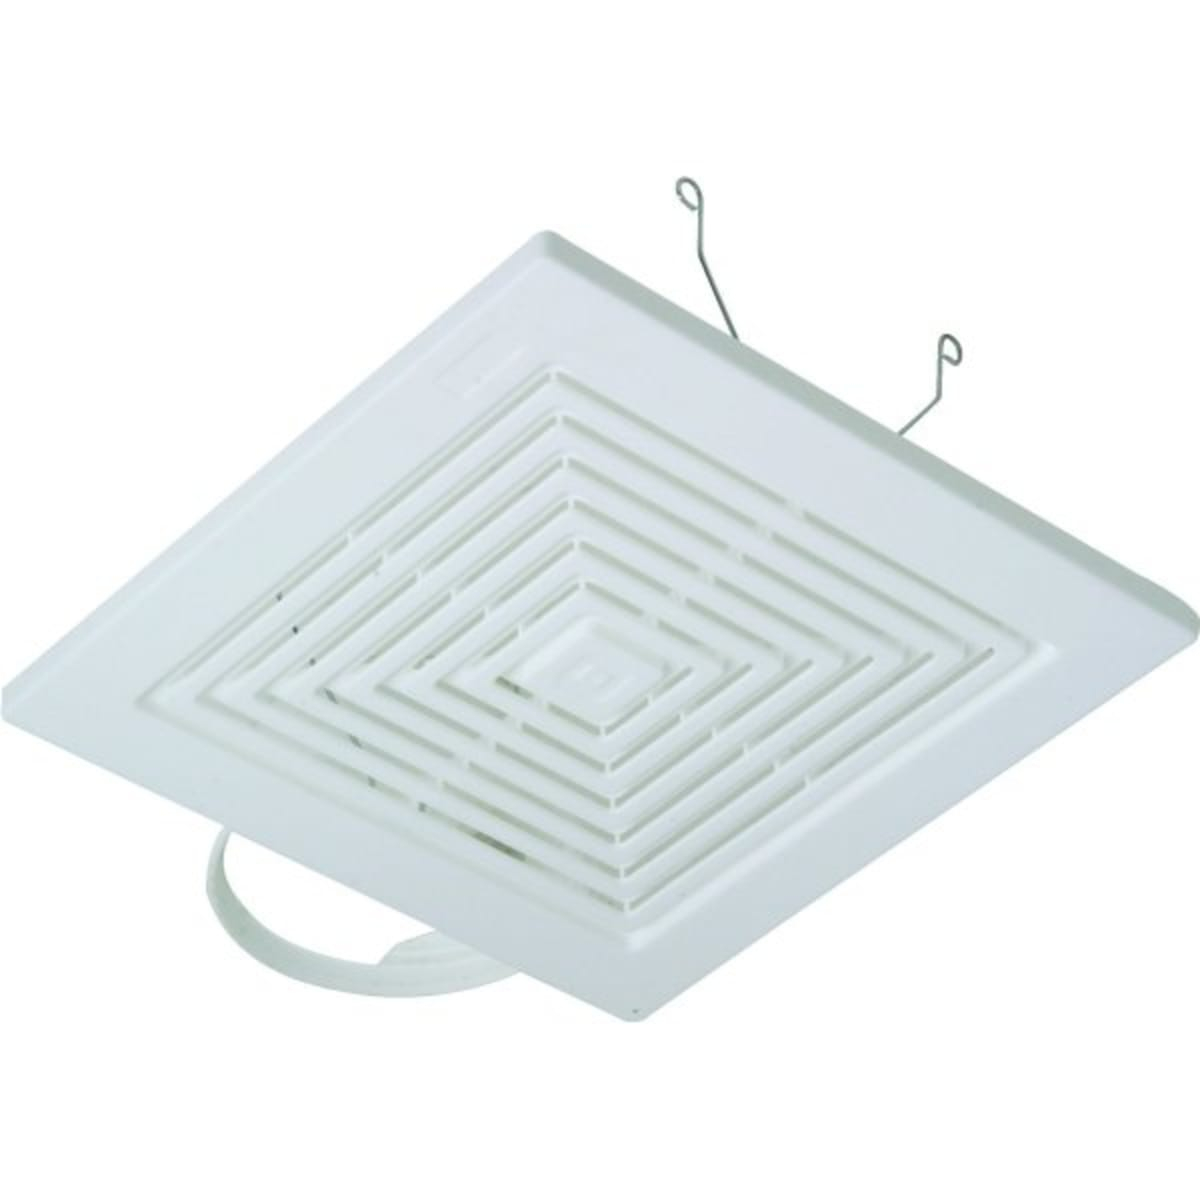 Exhaust Fans Grilles Hd Supply for measurements 1200 X 1200